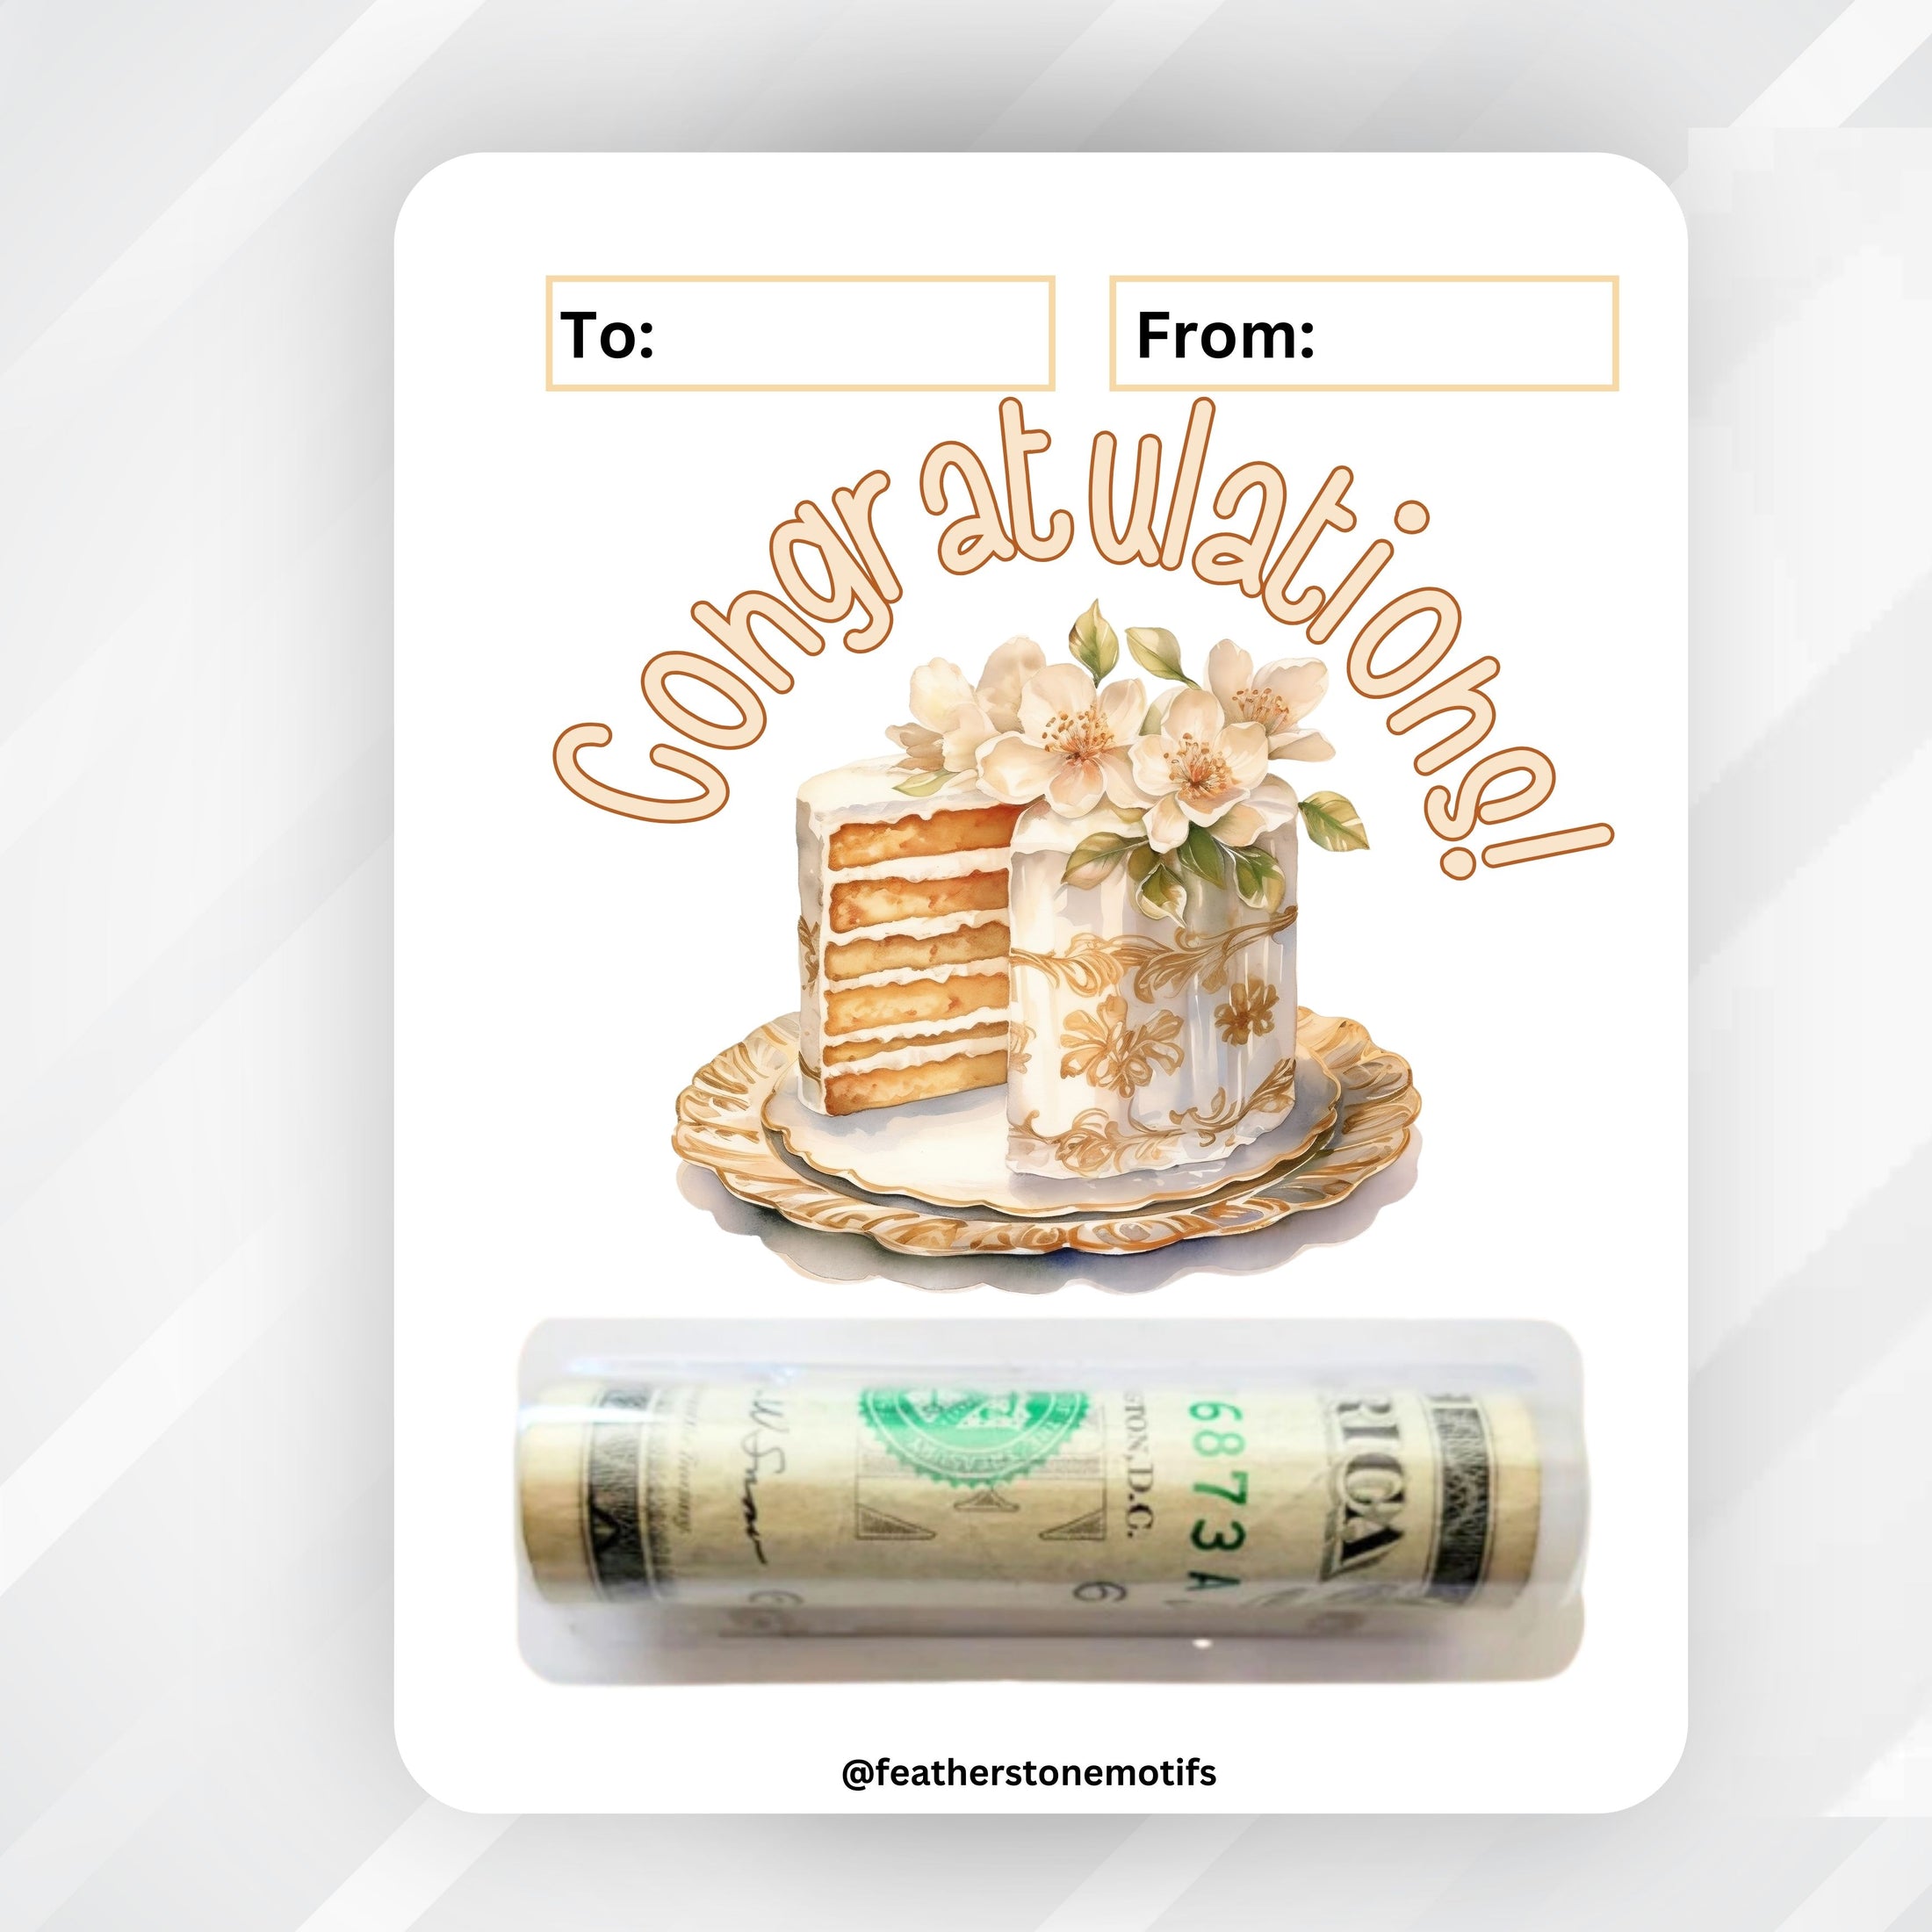 This image shows the money tube attached to the Congratulations Money Card.